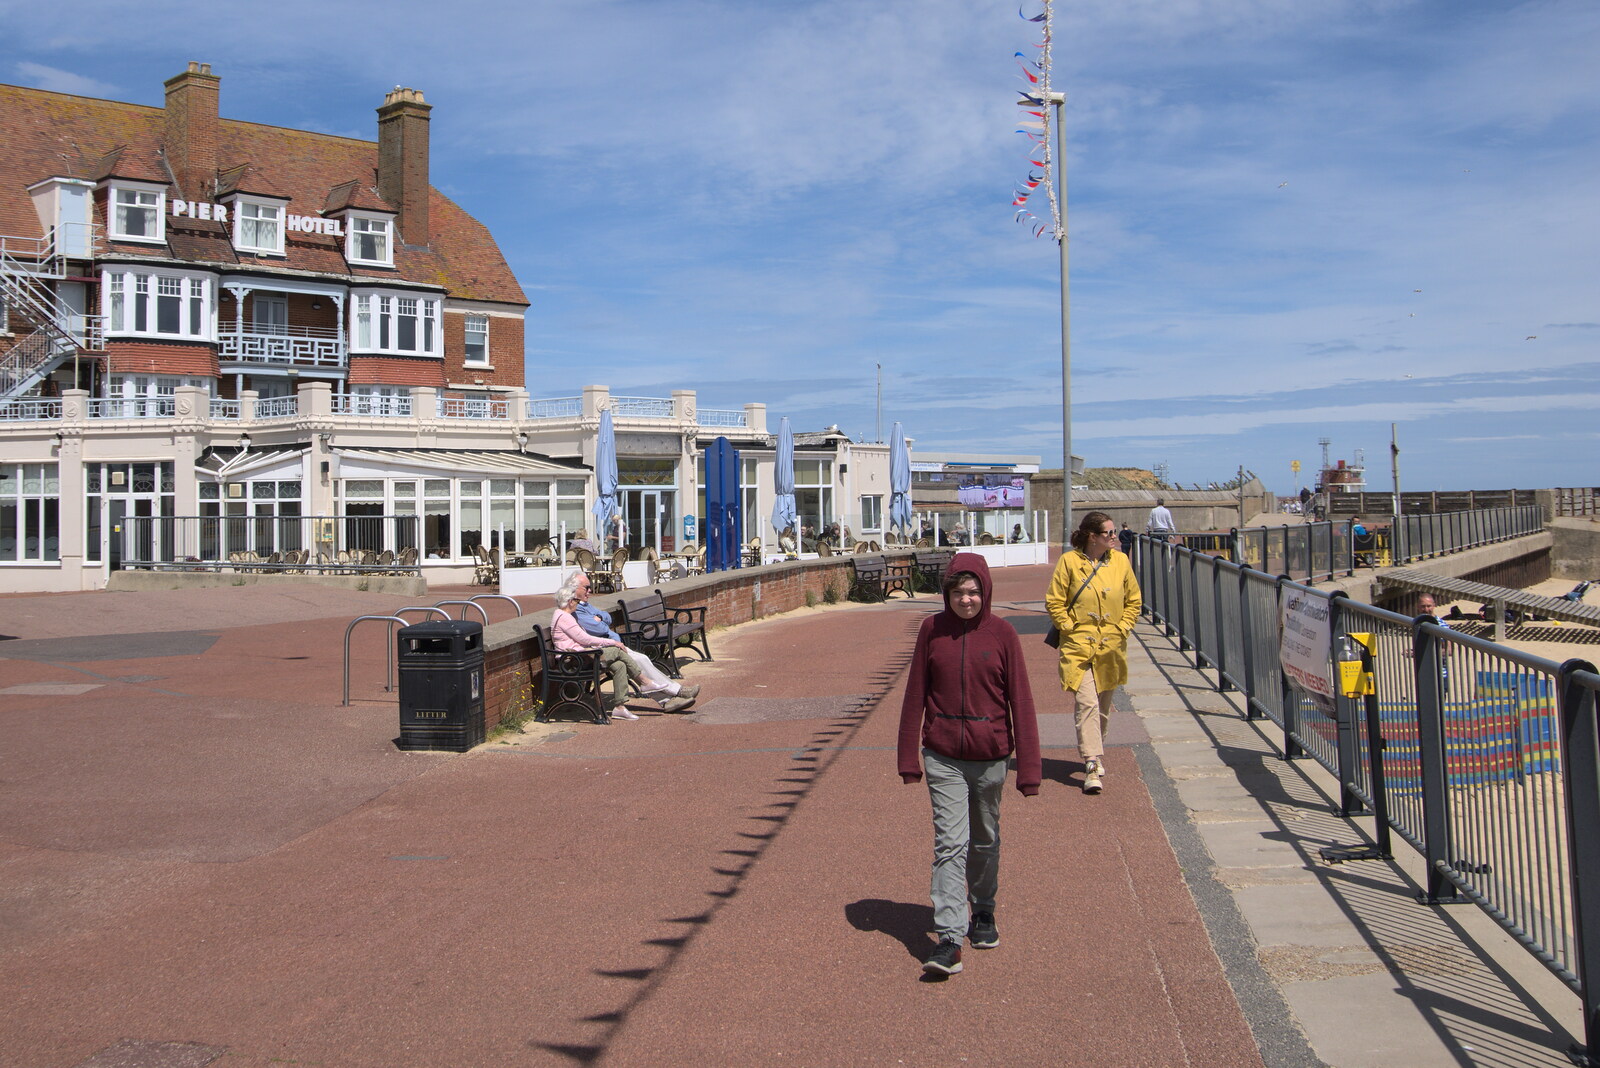 Fred and Isobel near the Pier Hotel from Faded Seaside Glamour: A Weekend in Great Yarmouth, Norfolk - 29th May 2022